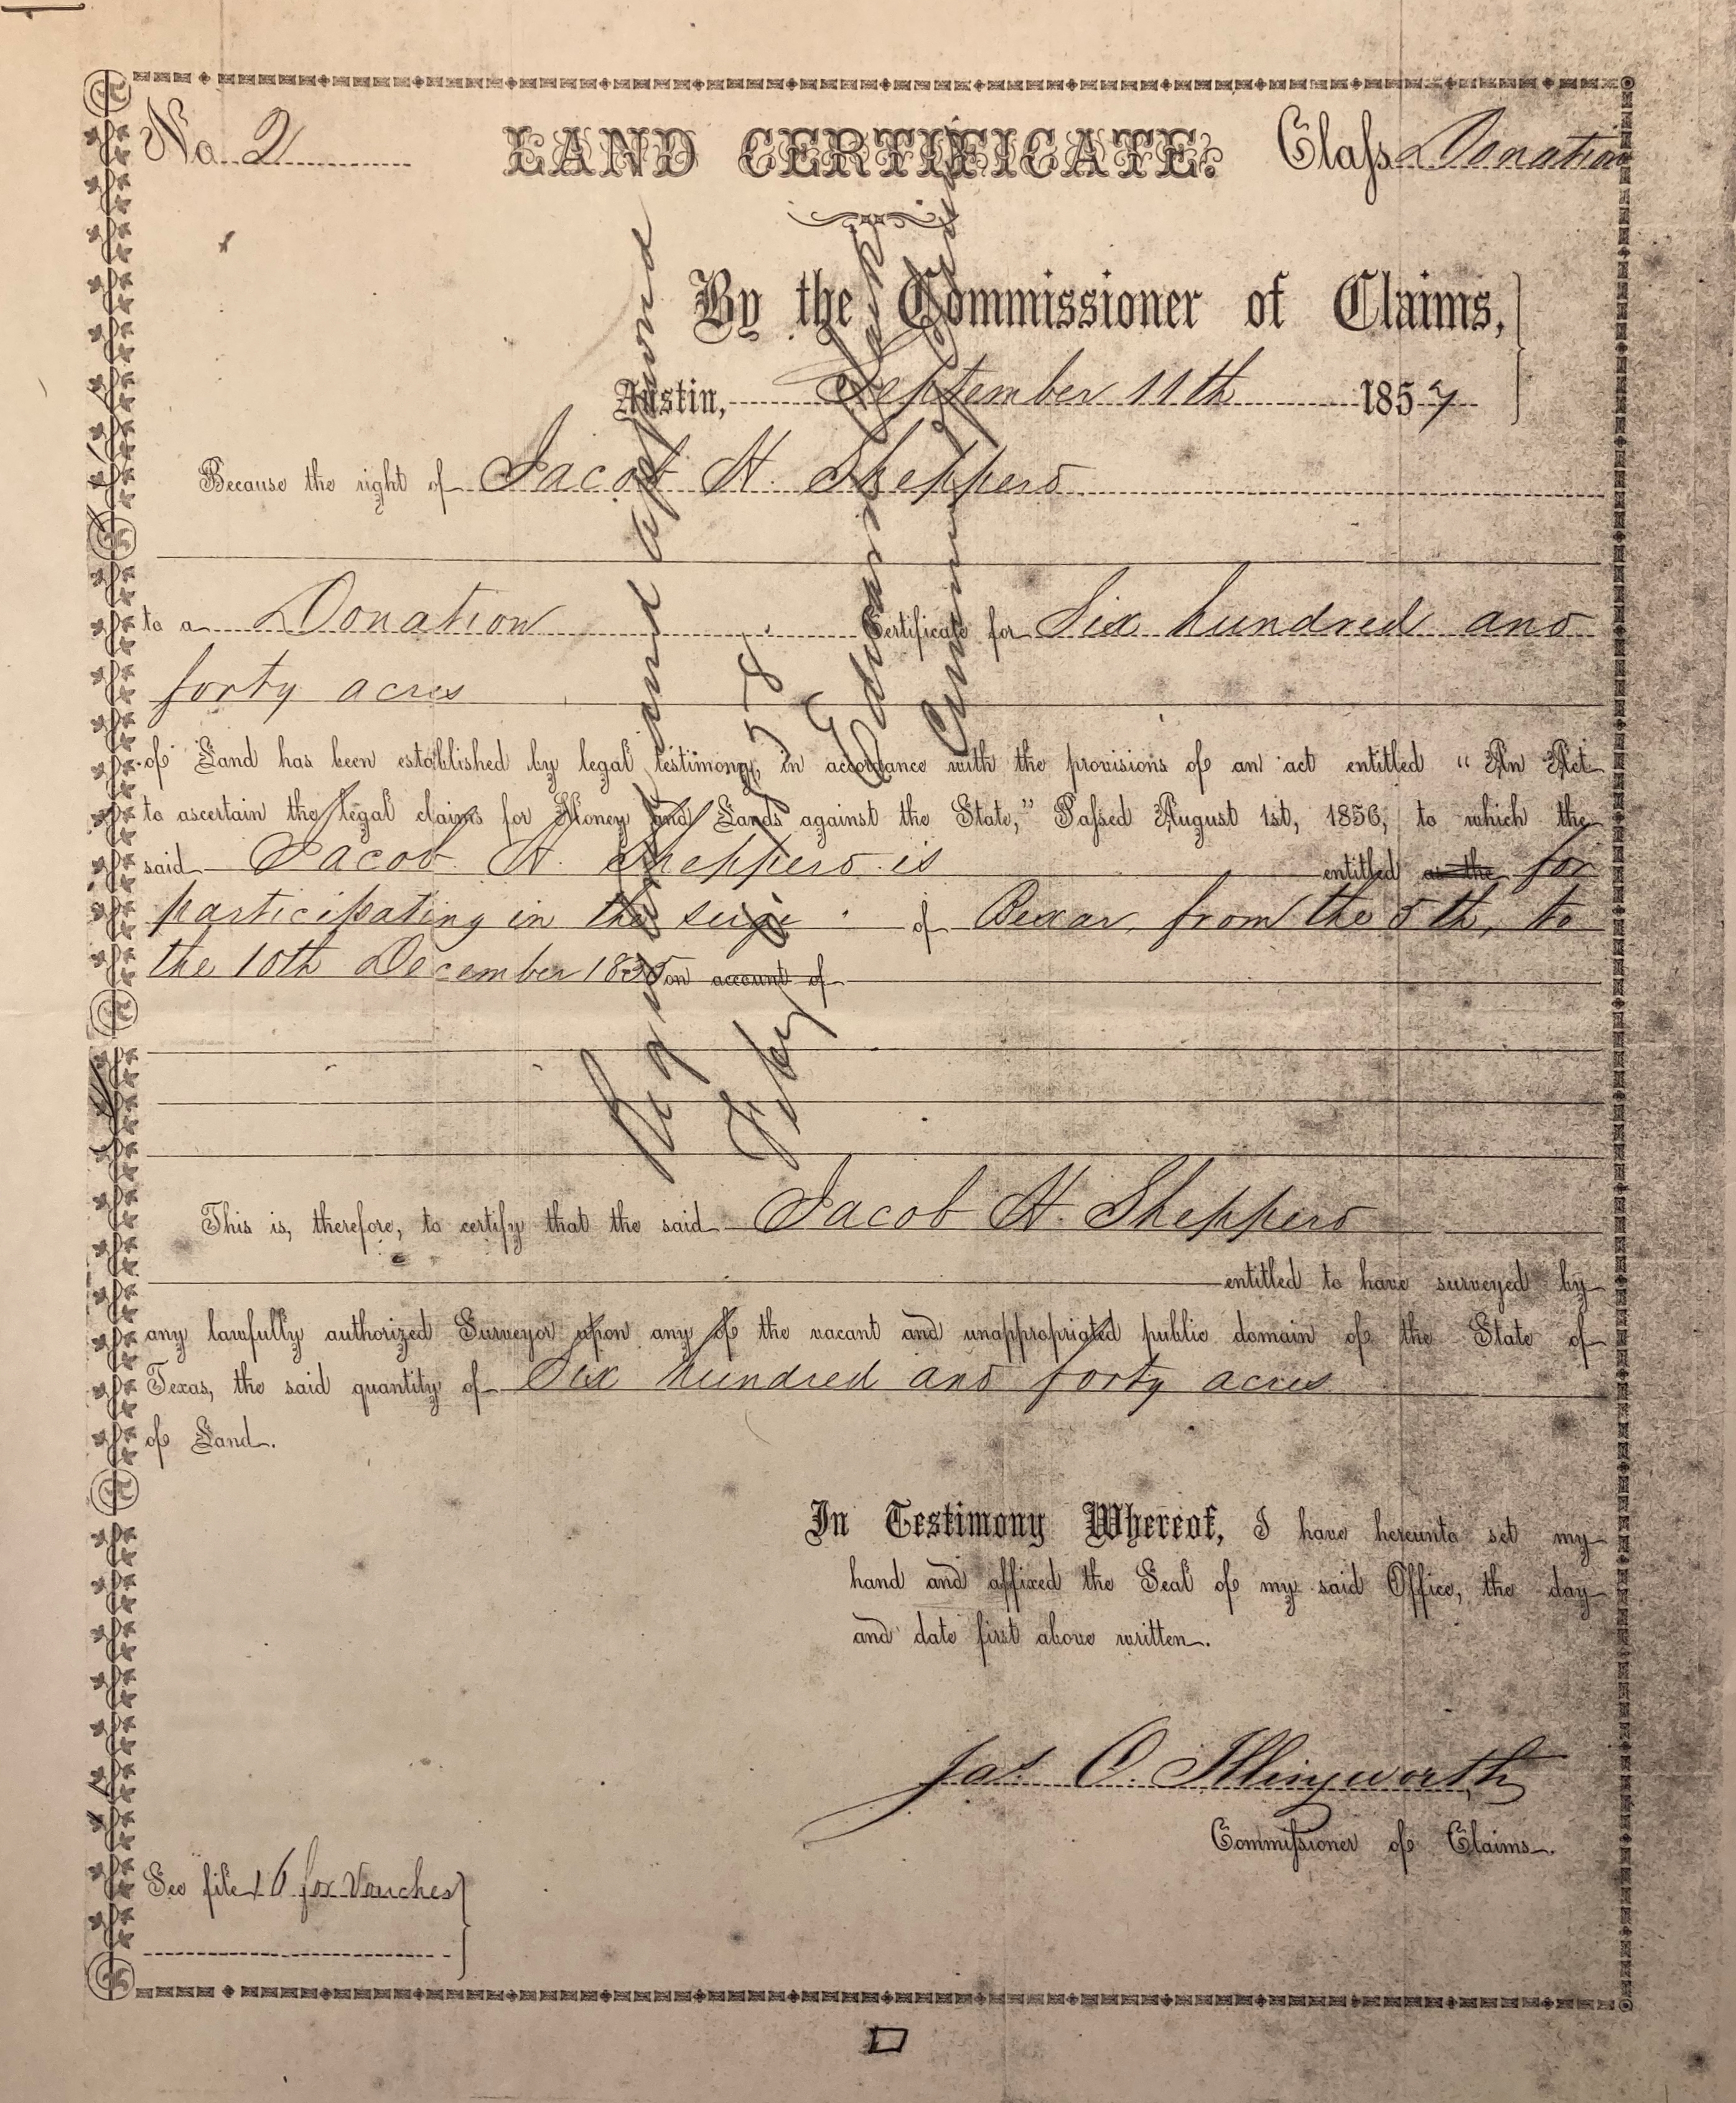 Jacob H. Shepperd's 640 Acre Donation Grant for military service in the Siege of Bexar